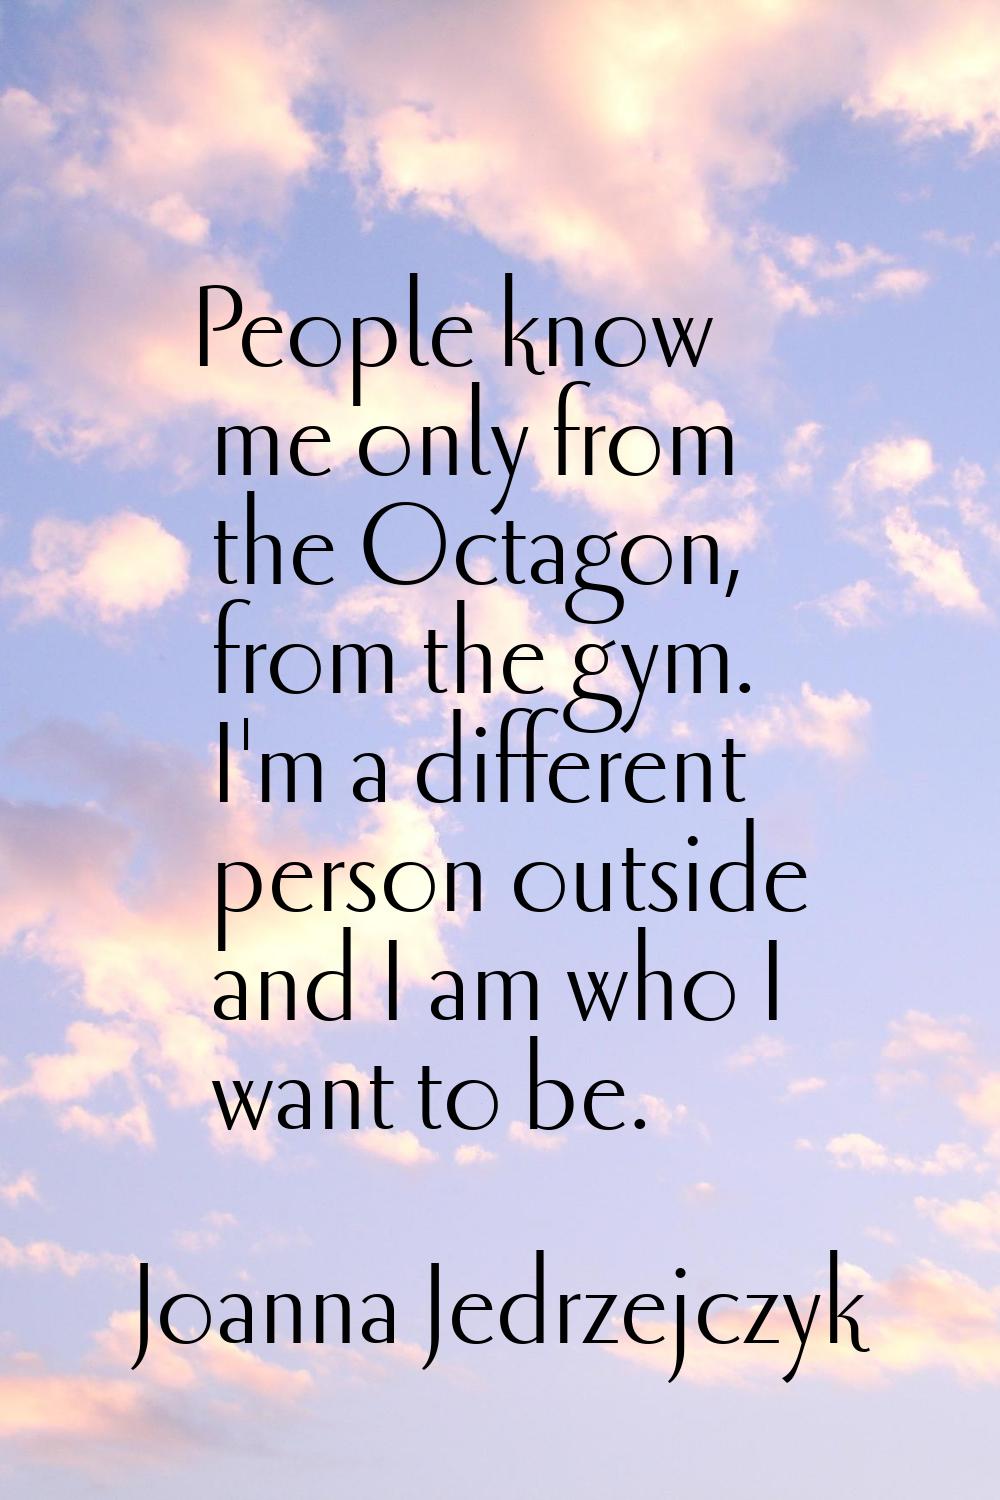 People know me only from the Octagon, from the gym. I'm a different person outside and I am who I w